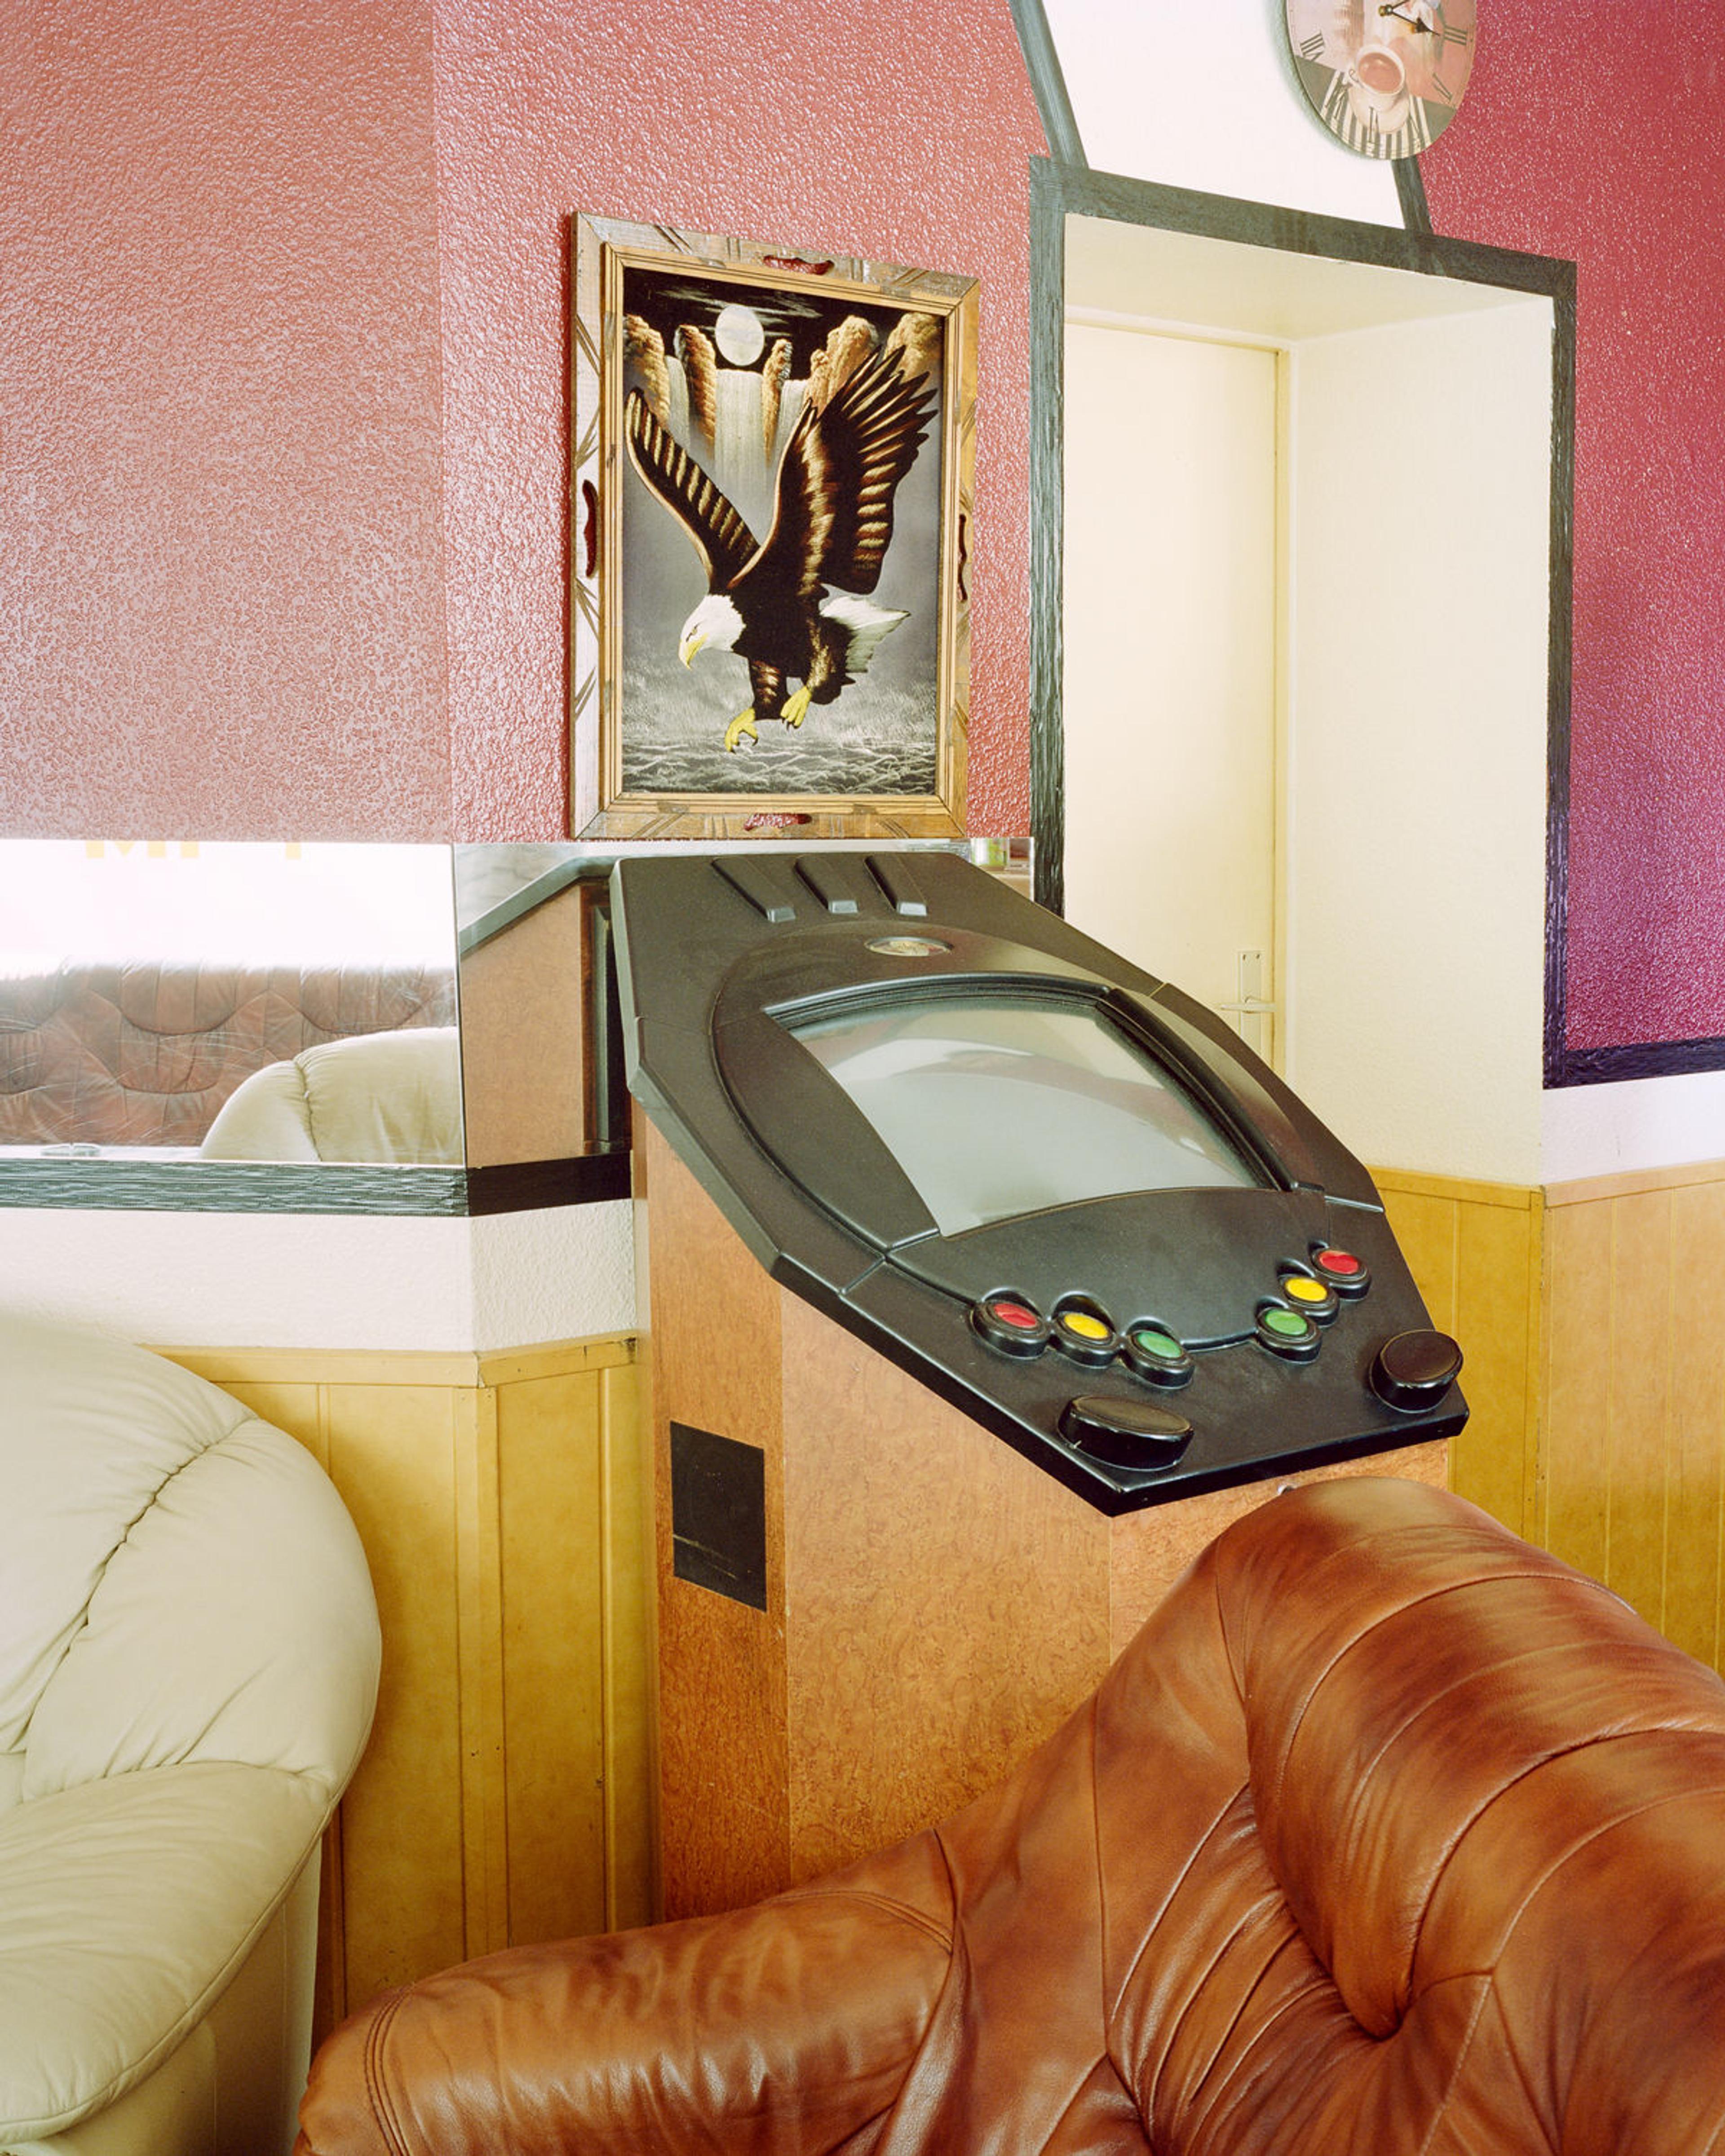 A slot machine in front of a picture of an eagle.